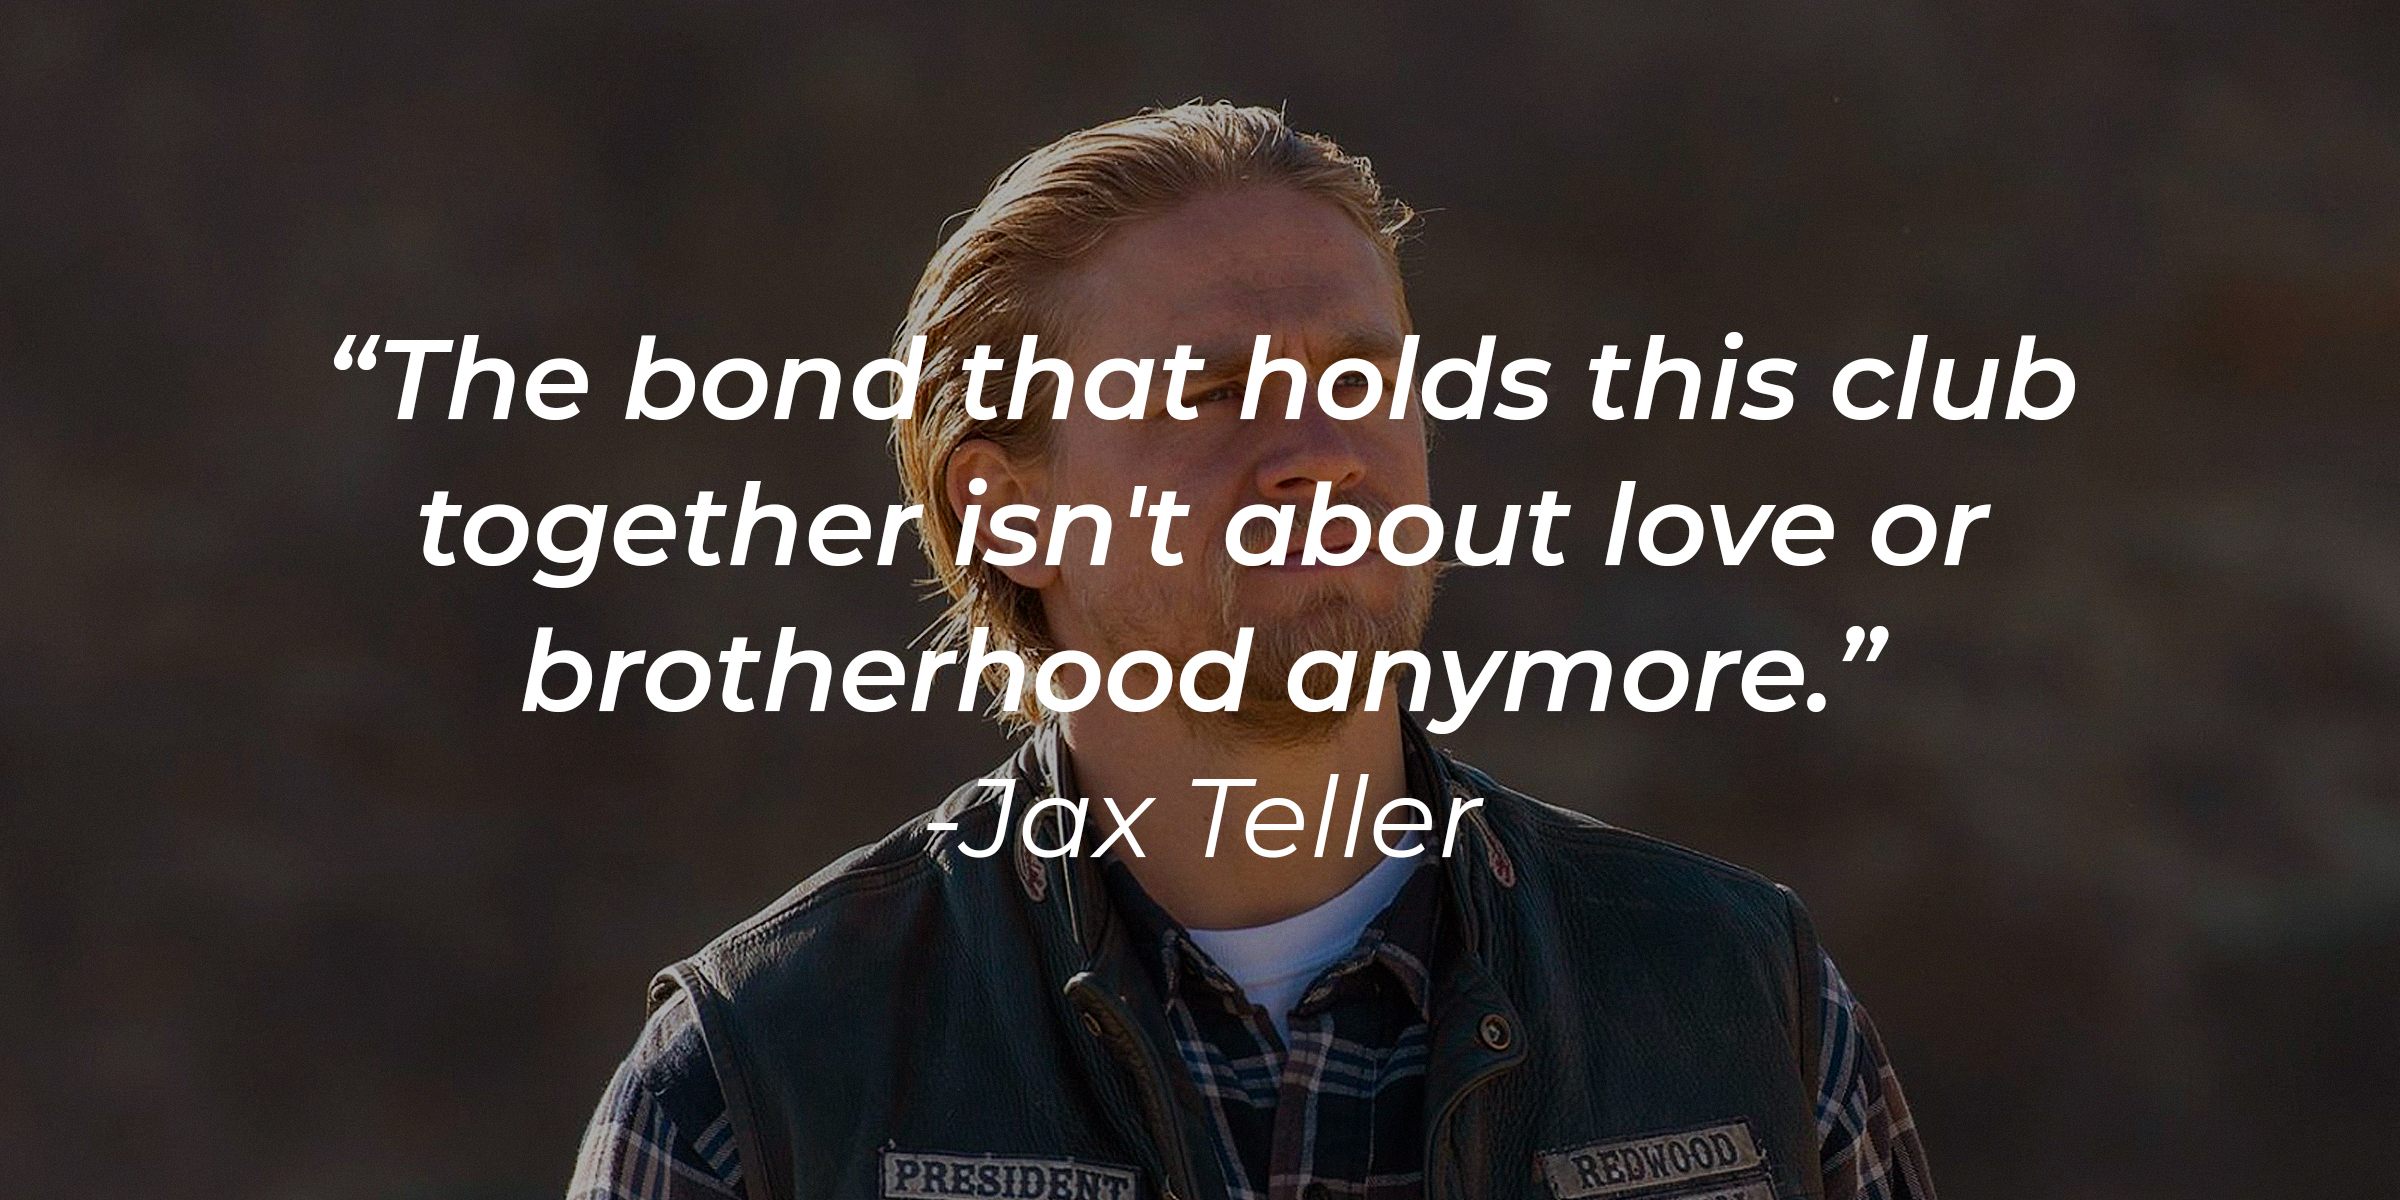 Jax Teller with his quote: “The bond that holds this club together isn't about love or brotherhood anymore." | Source: facebook.com/SonsofAnarchy